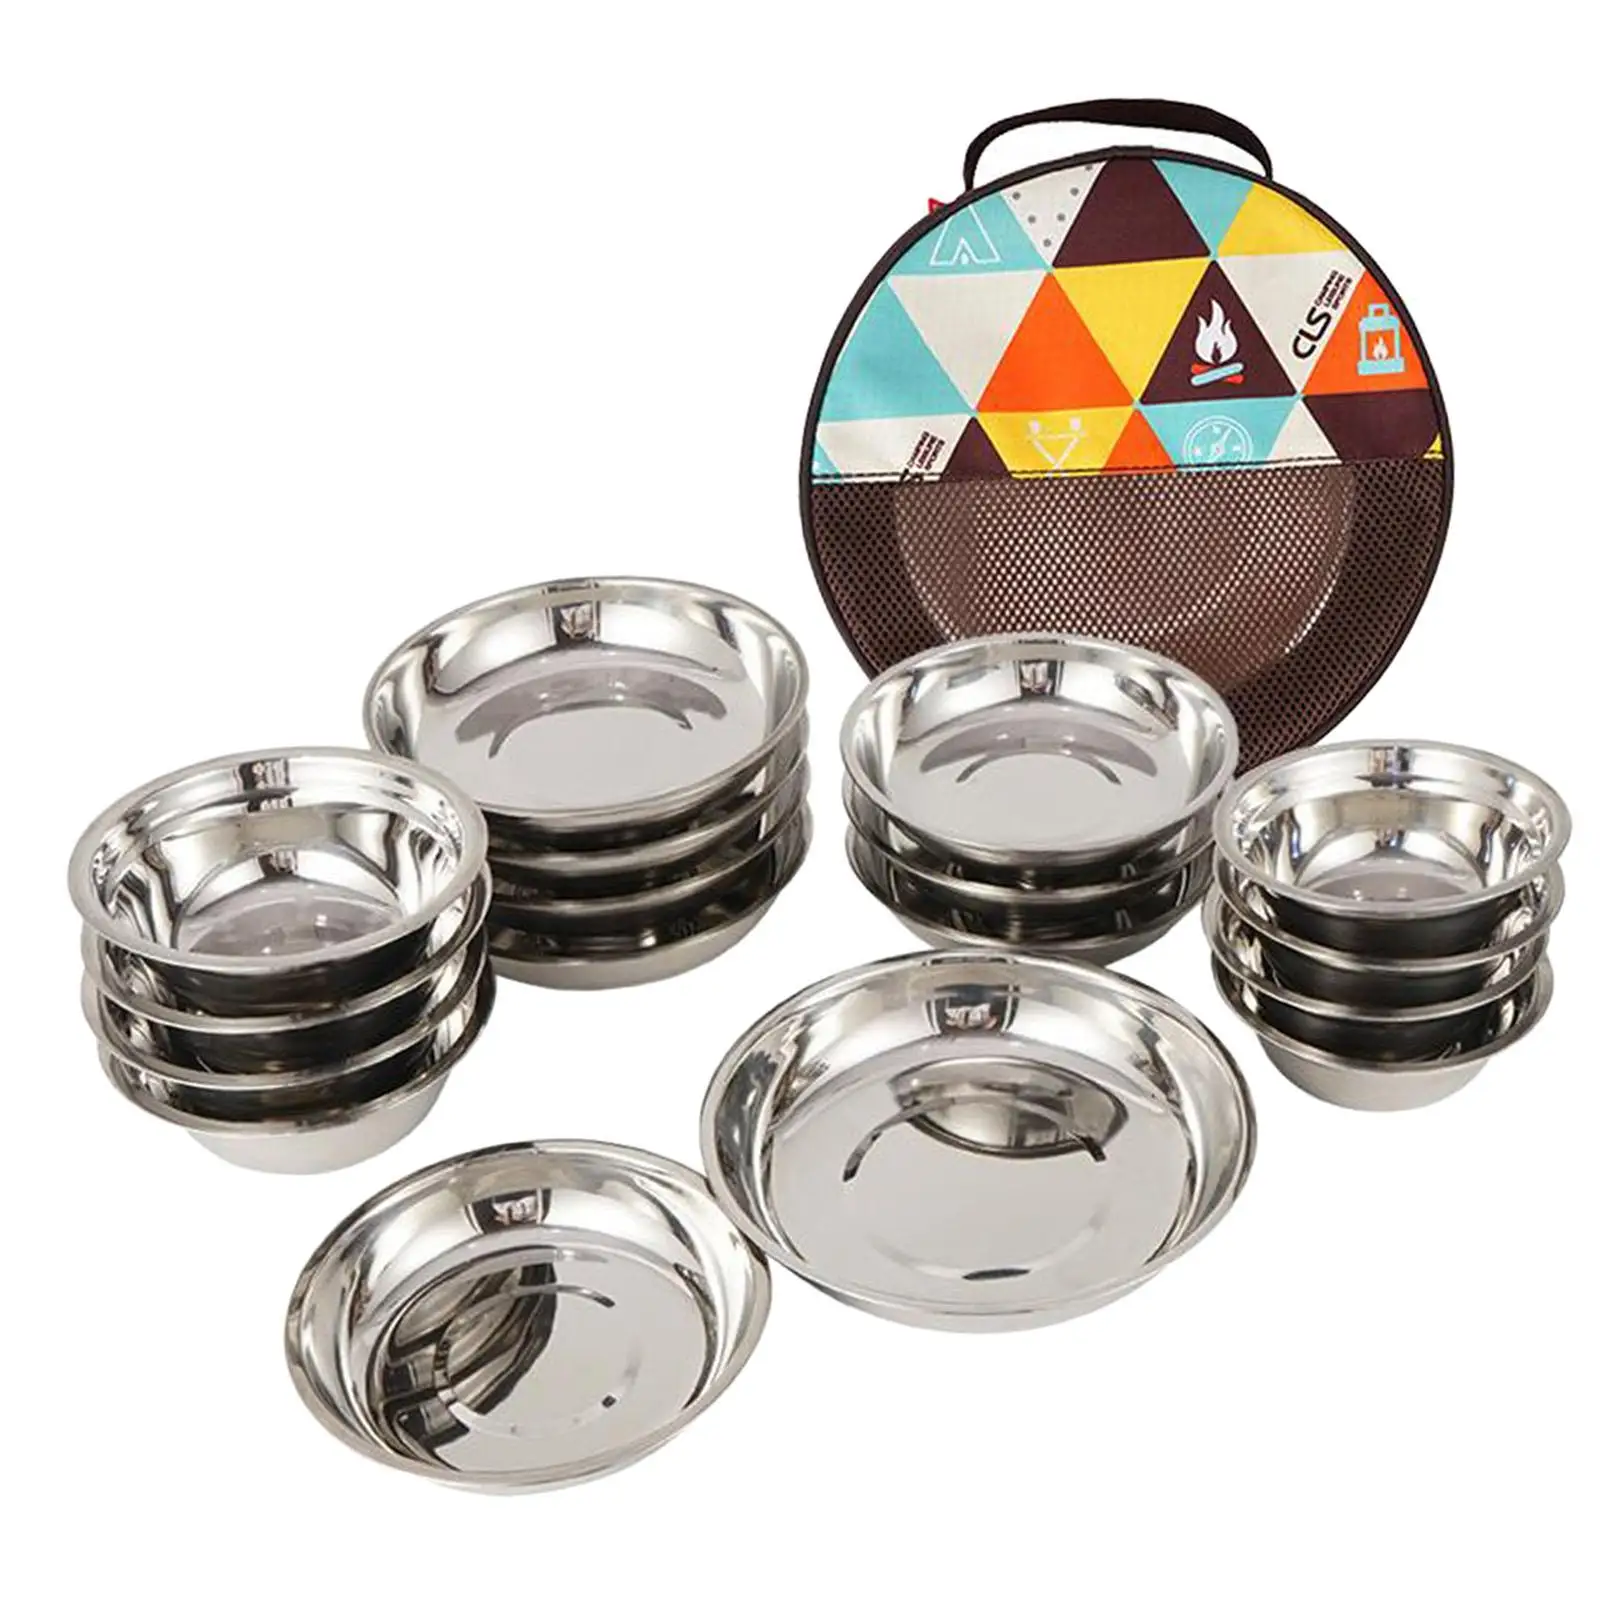 17Pieces Stainless Steel Plates and Bowls Set Small and Large Dinnerware